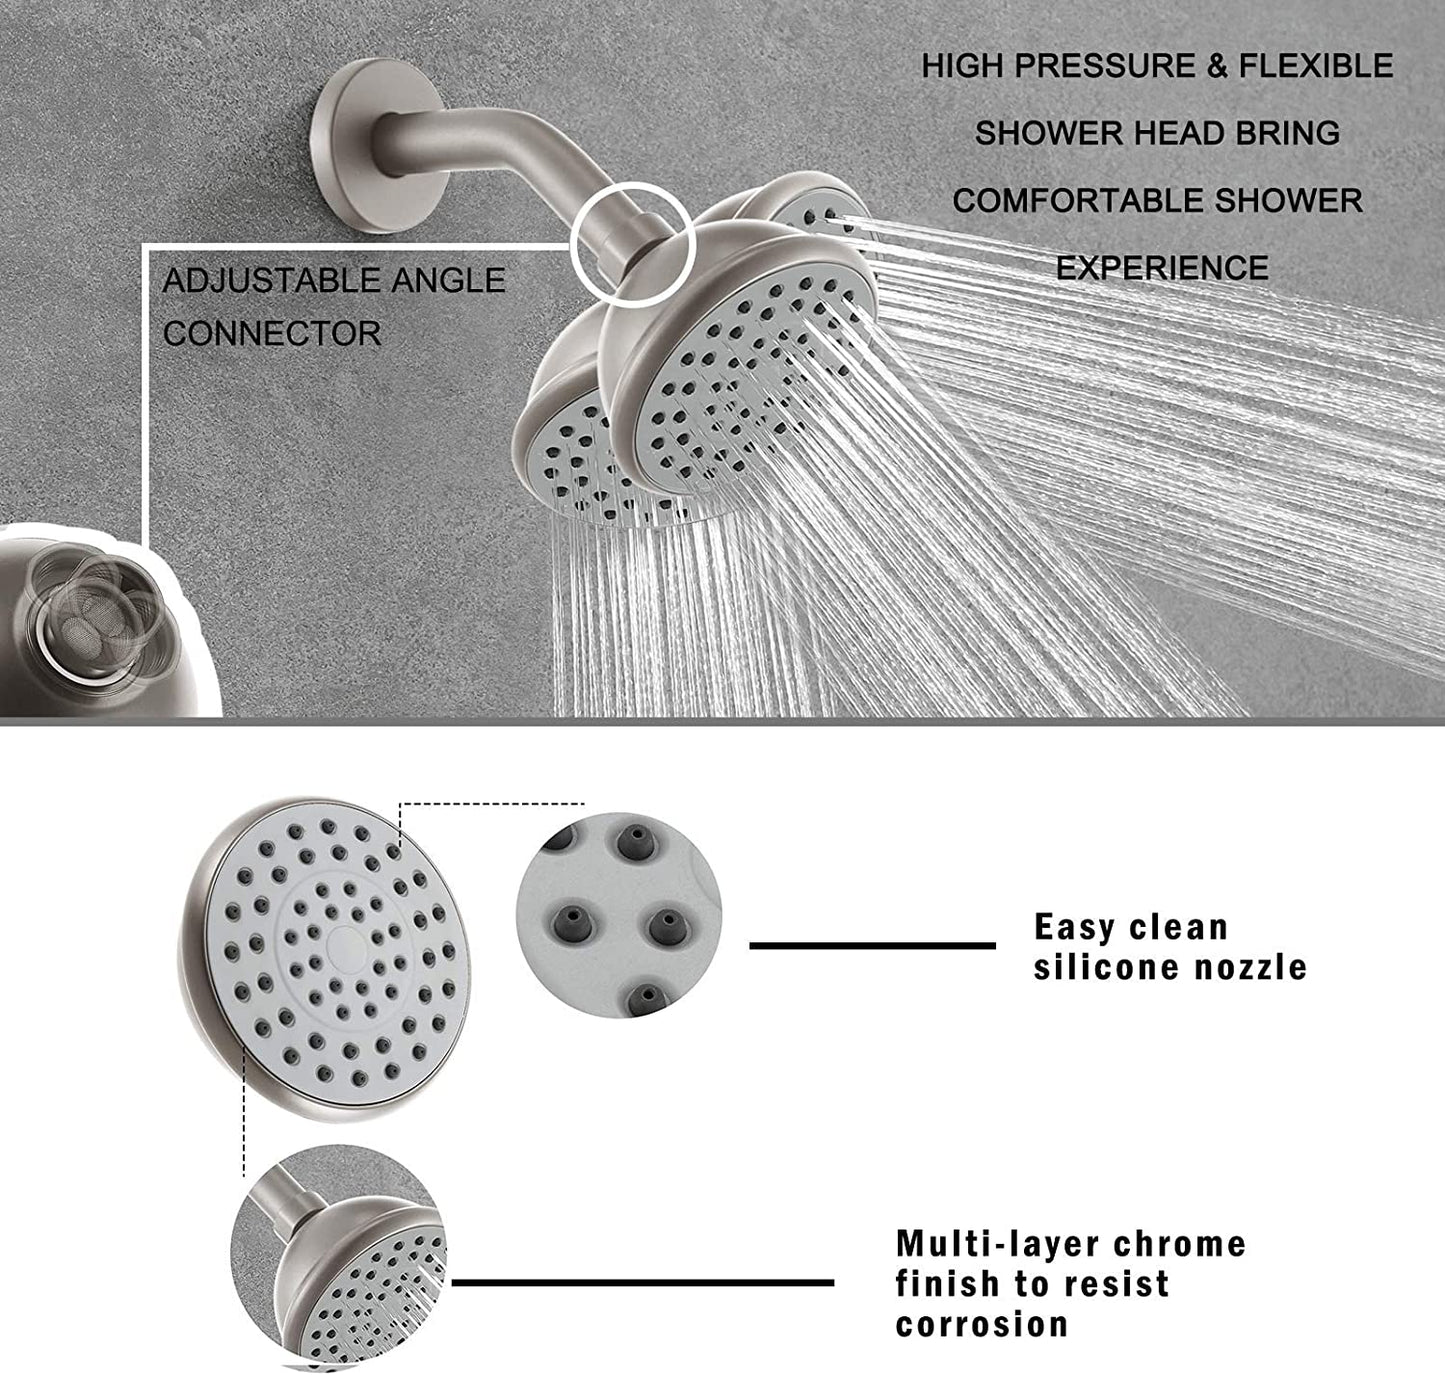 Brushed Nickel 4 Inch Shower Faucet wih Tub Spout Combo (Valve Included) ｜ALWEN